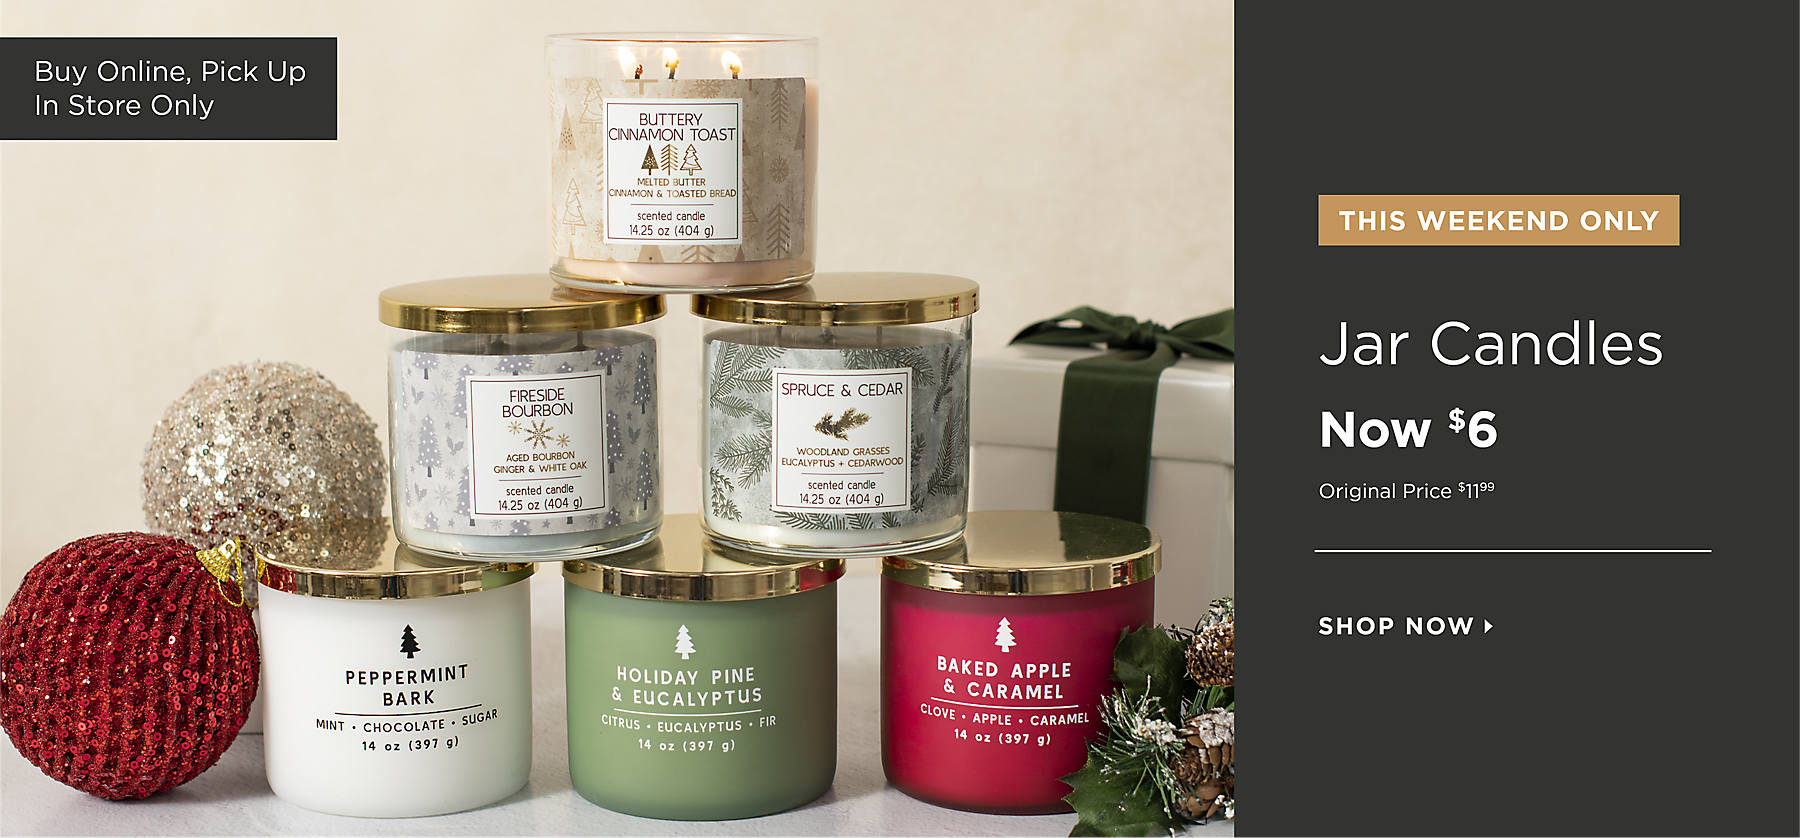 This Weekend Only Buy Online Pick Up In Store Only Jar Candles Now $6 Original Price $11.99 Shop Now